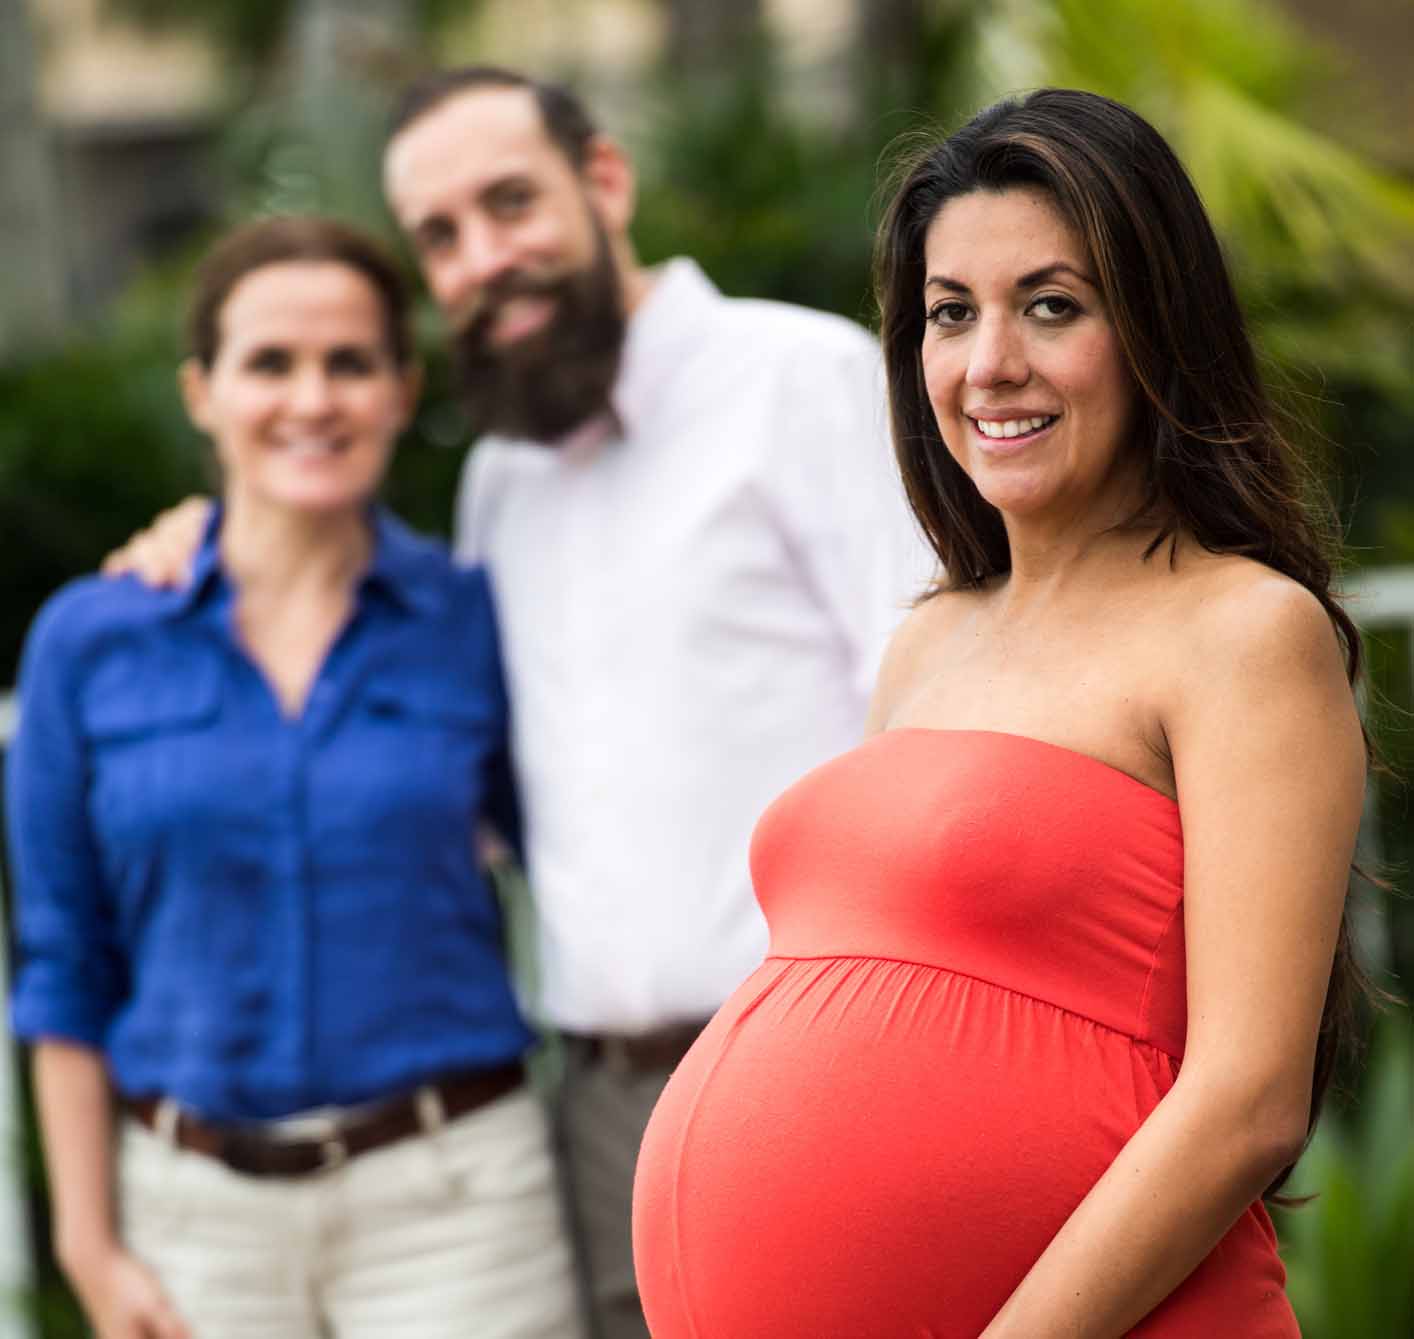 Pregnant Hispanic surrogate mother posing with the babies future parents 1414 x 1339